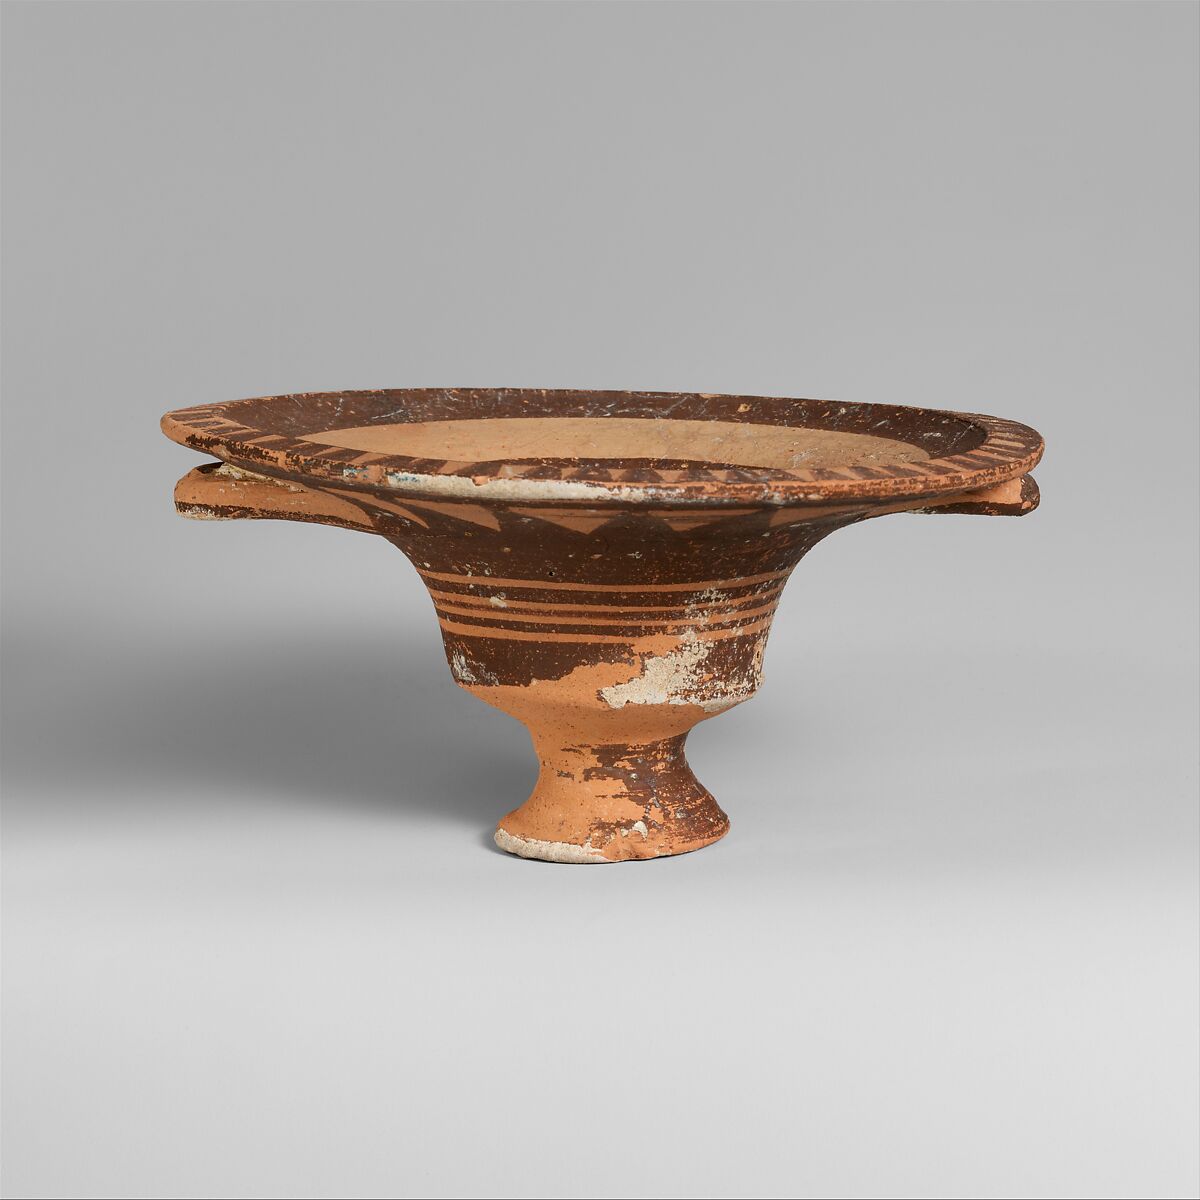 Terracotta stemmed dish with two handles, Terracotta, Cypriot 